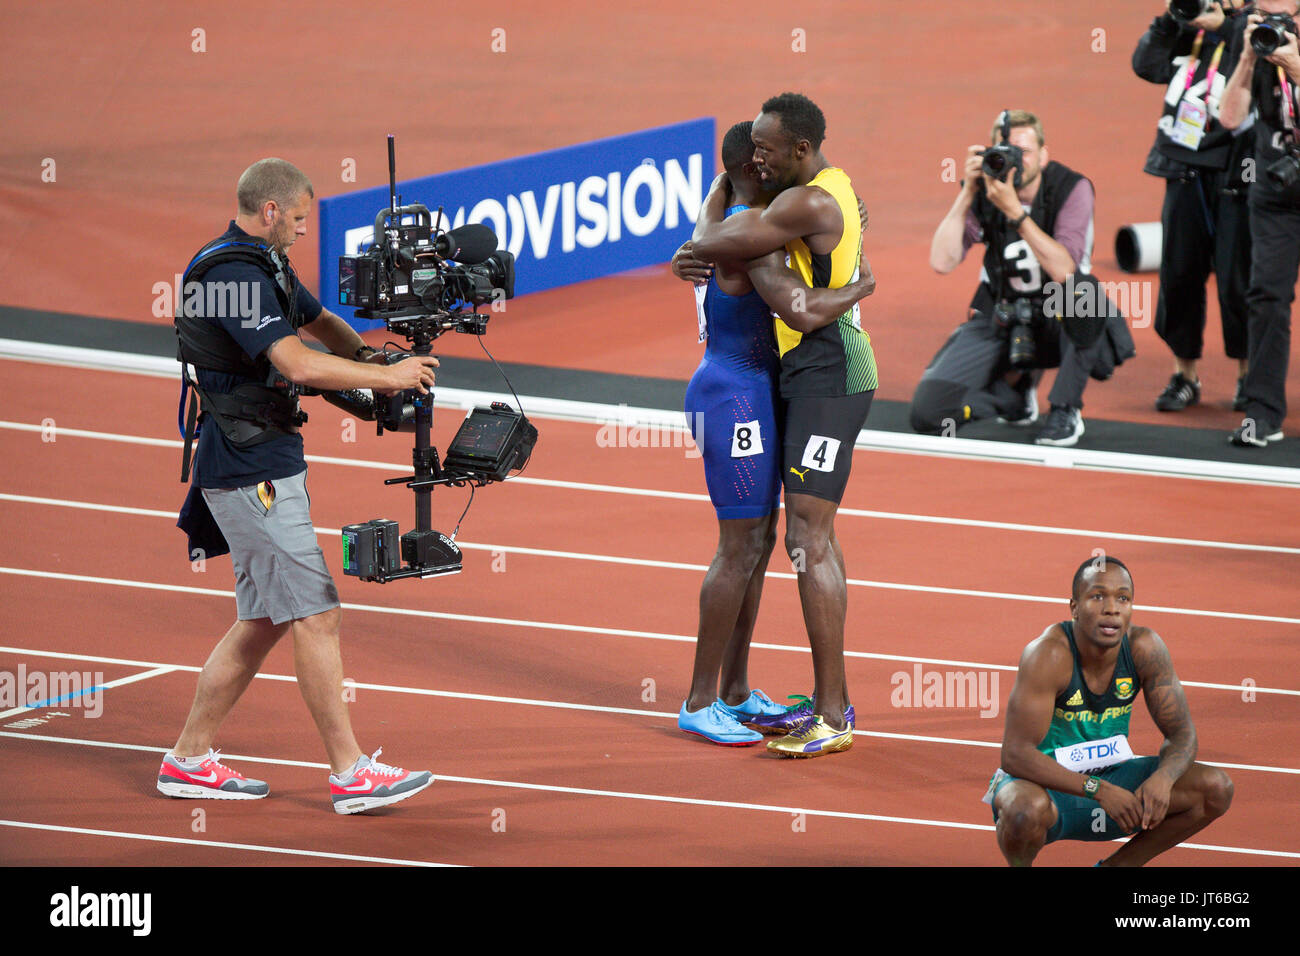 LONDON, ENGLAND - AUGUST 05: Usain Bolt  and Justin Gatlin (blue top) after the Men's 100m final during day two of the 17th IAAF World Athletics Championships London 2017 at The London Stadium on August 5, 2017 in London, United Kingdom.Justin Gatlin of the United States won the race. Stock Photo